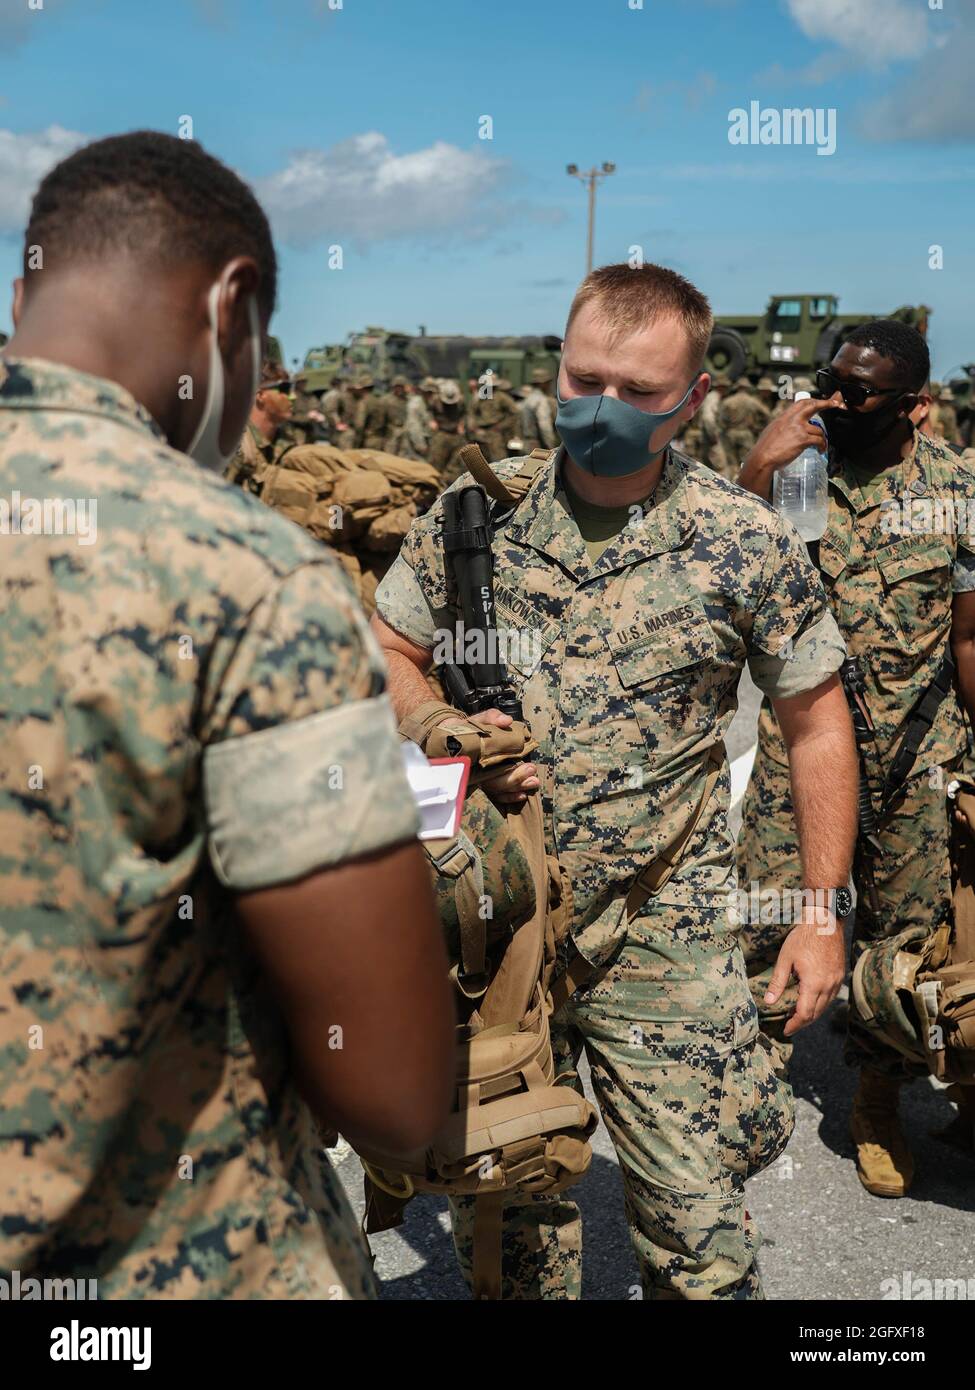 U.S. Marine Corps Lance Cpl. Jarod Jankowski, a landing support specialist with Combat Logistics Regiment 3, 3d Marine Logistics Group, and Chicago, Illinois, native, weighs in during an integrated rapid response inspection at Kadena Air Base, Okinawa, Japan, August 25, 2021. Routine short-notice inspections ensure III MEF Marines remain ready to rapidly deploy and maintain regional security in the Indo-Pacific. 3d MLG, based out of Okinawa, Japan, is a forward deployed combat unit that serves as III Marine Expeditionary Force’s comprehensive logistics and combat service support backbone for o Stock Photo